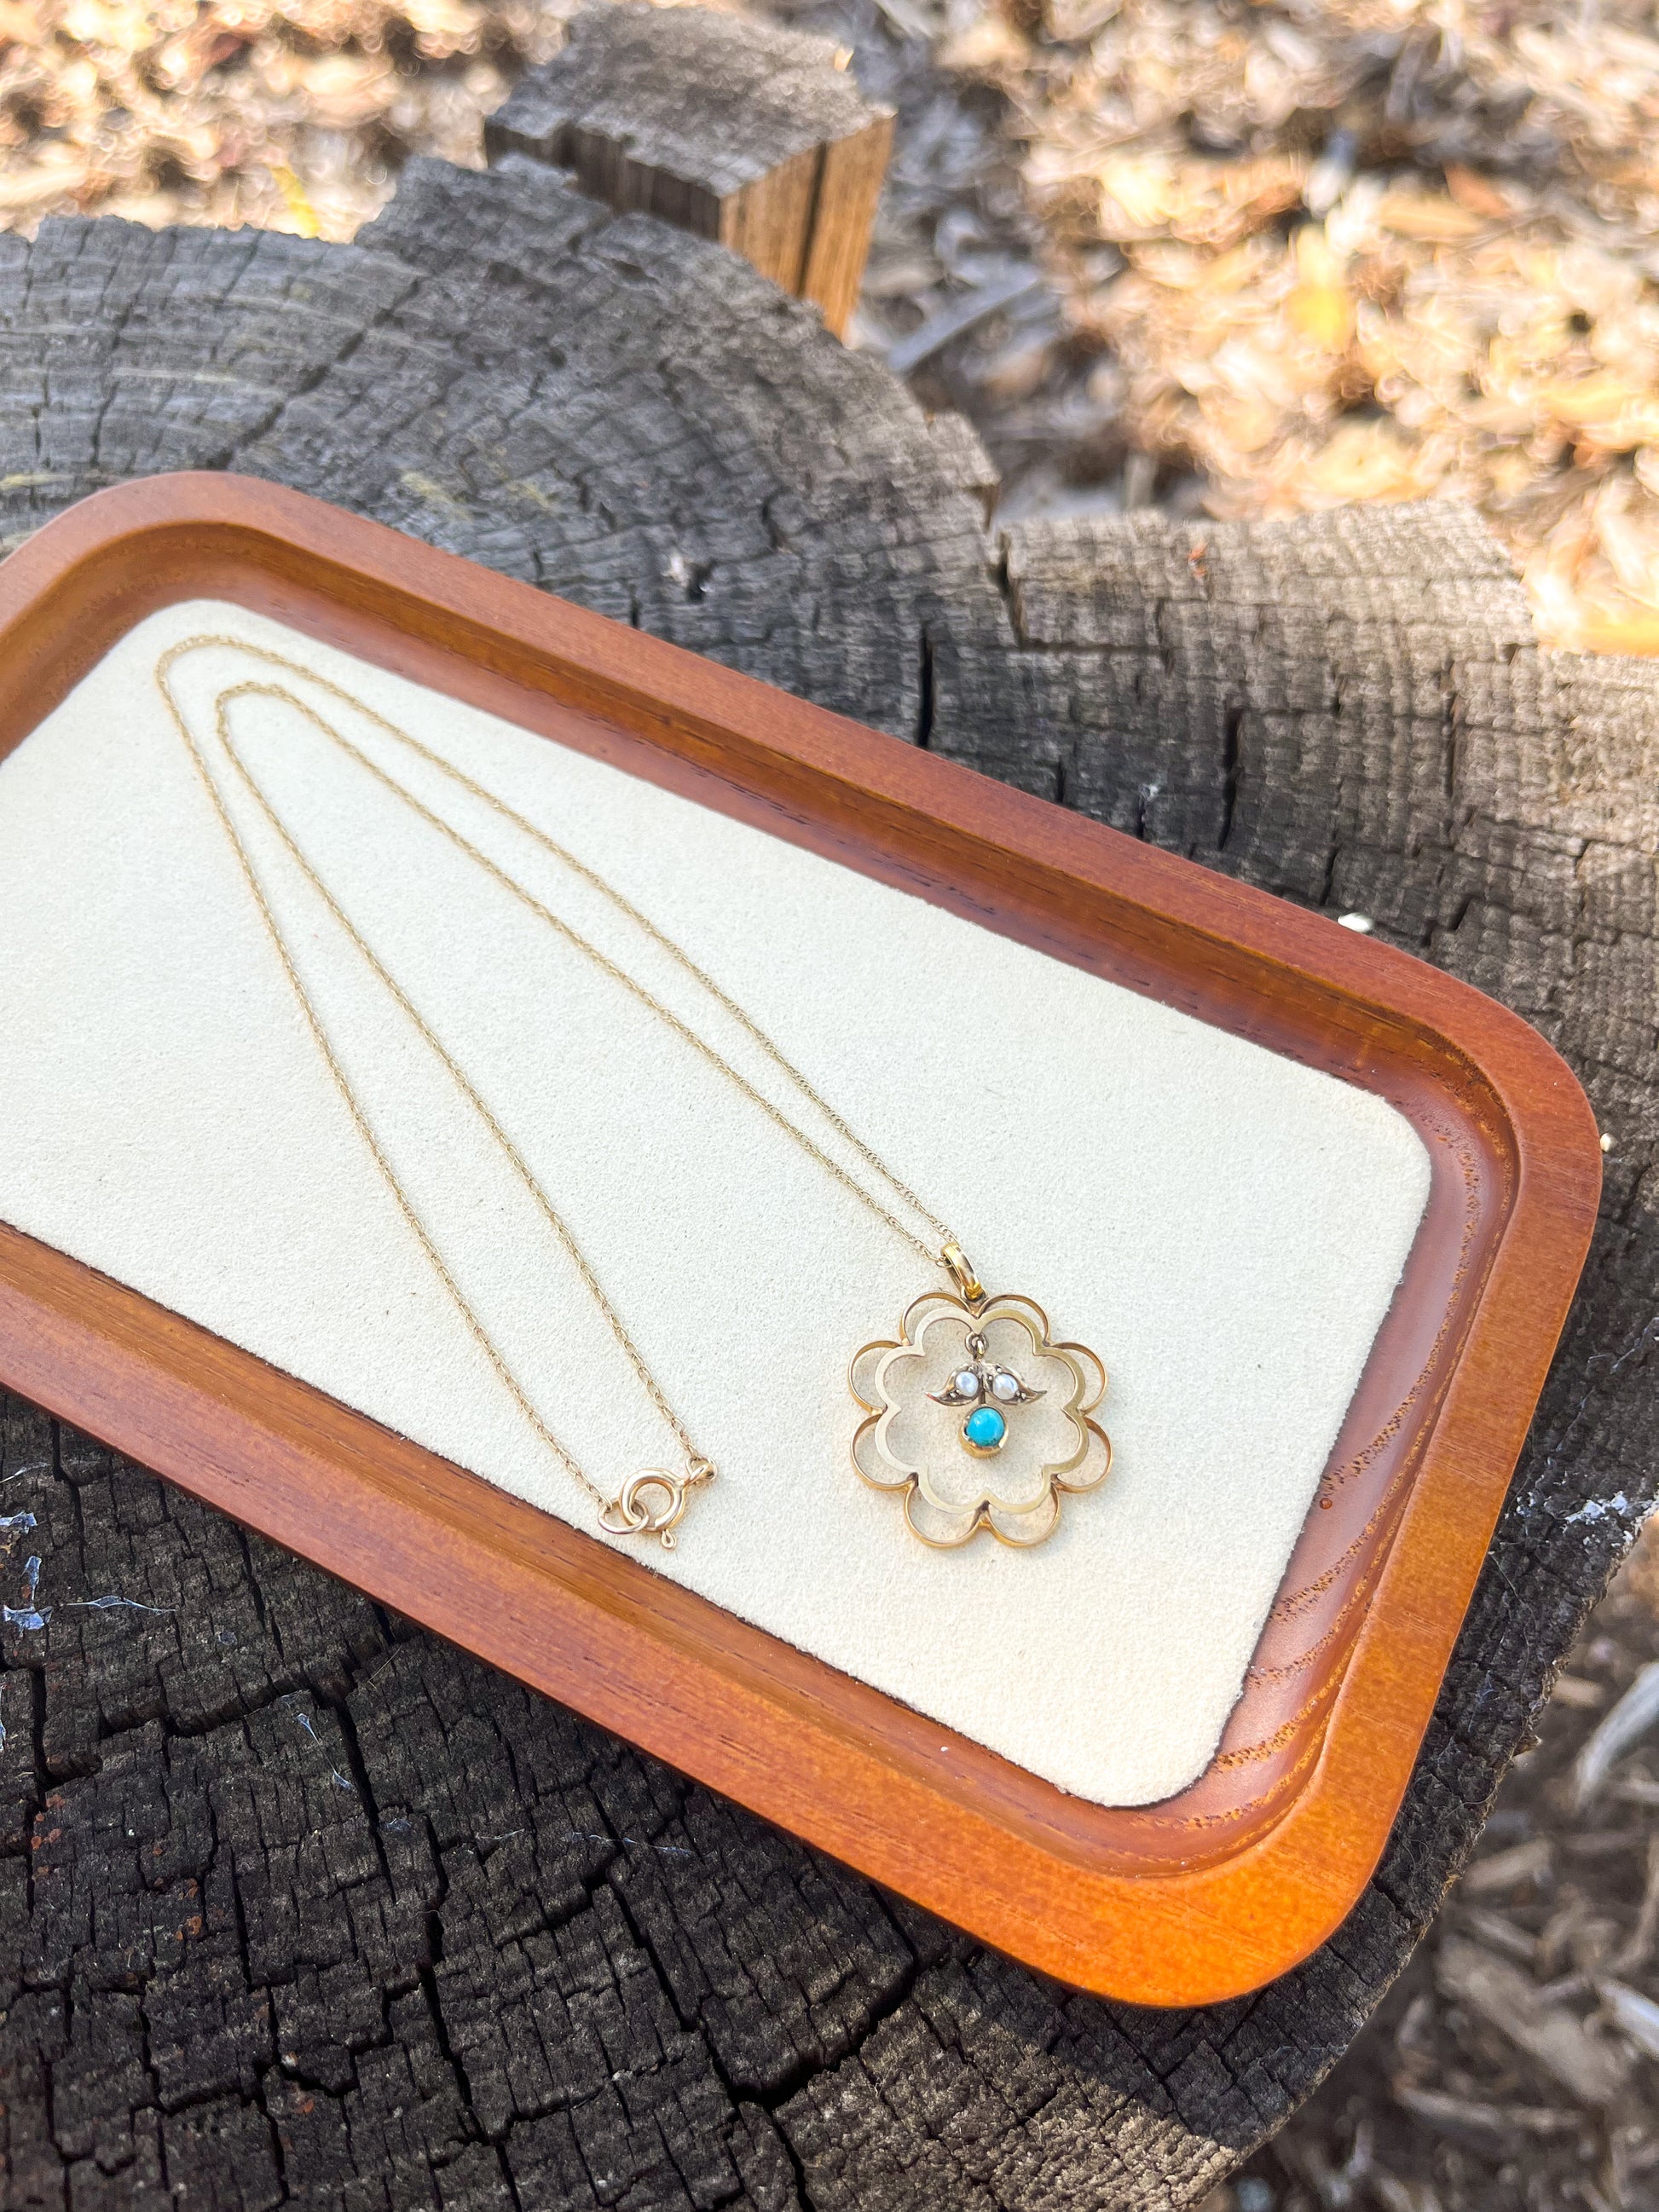 Antique Edwardian Turquoise & Seed Pearls 9k Gold Necklace (UK 1900s) Art Nouveau (sustainable jewelry) collectible jewelry, anniversary, wedding, graduation gift